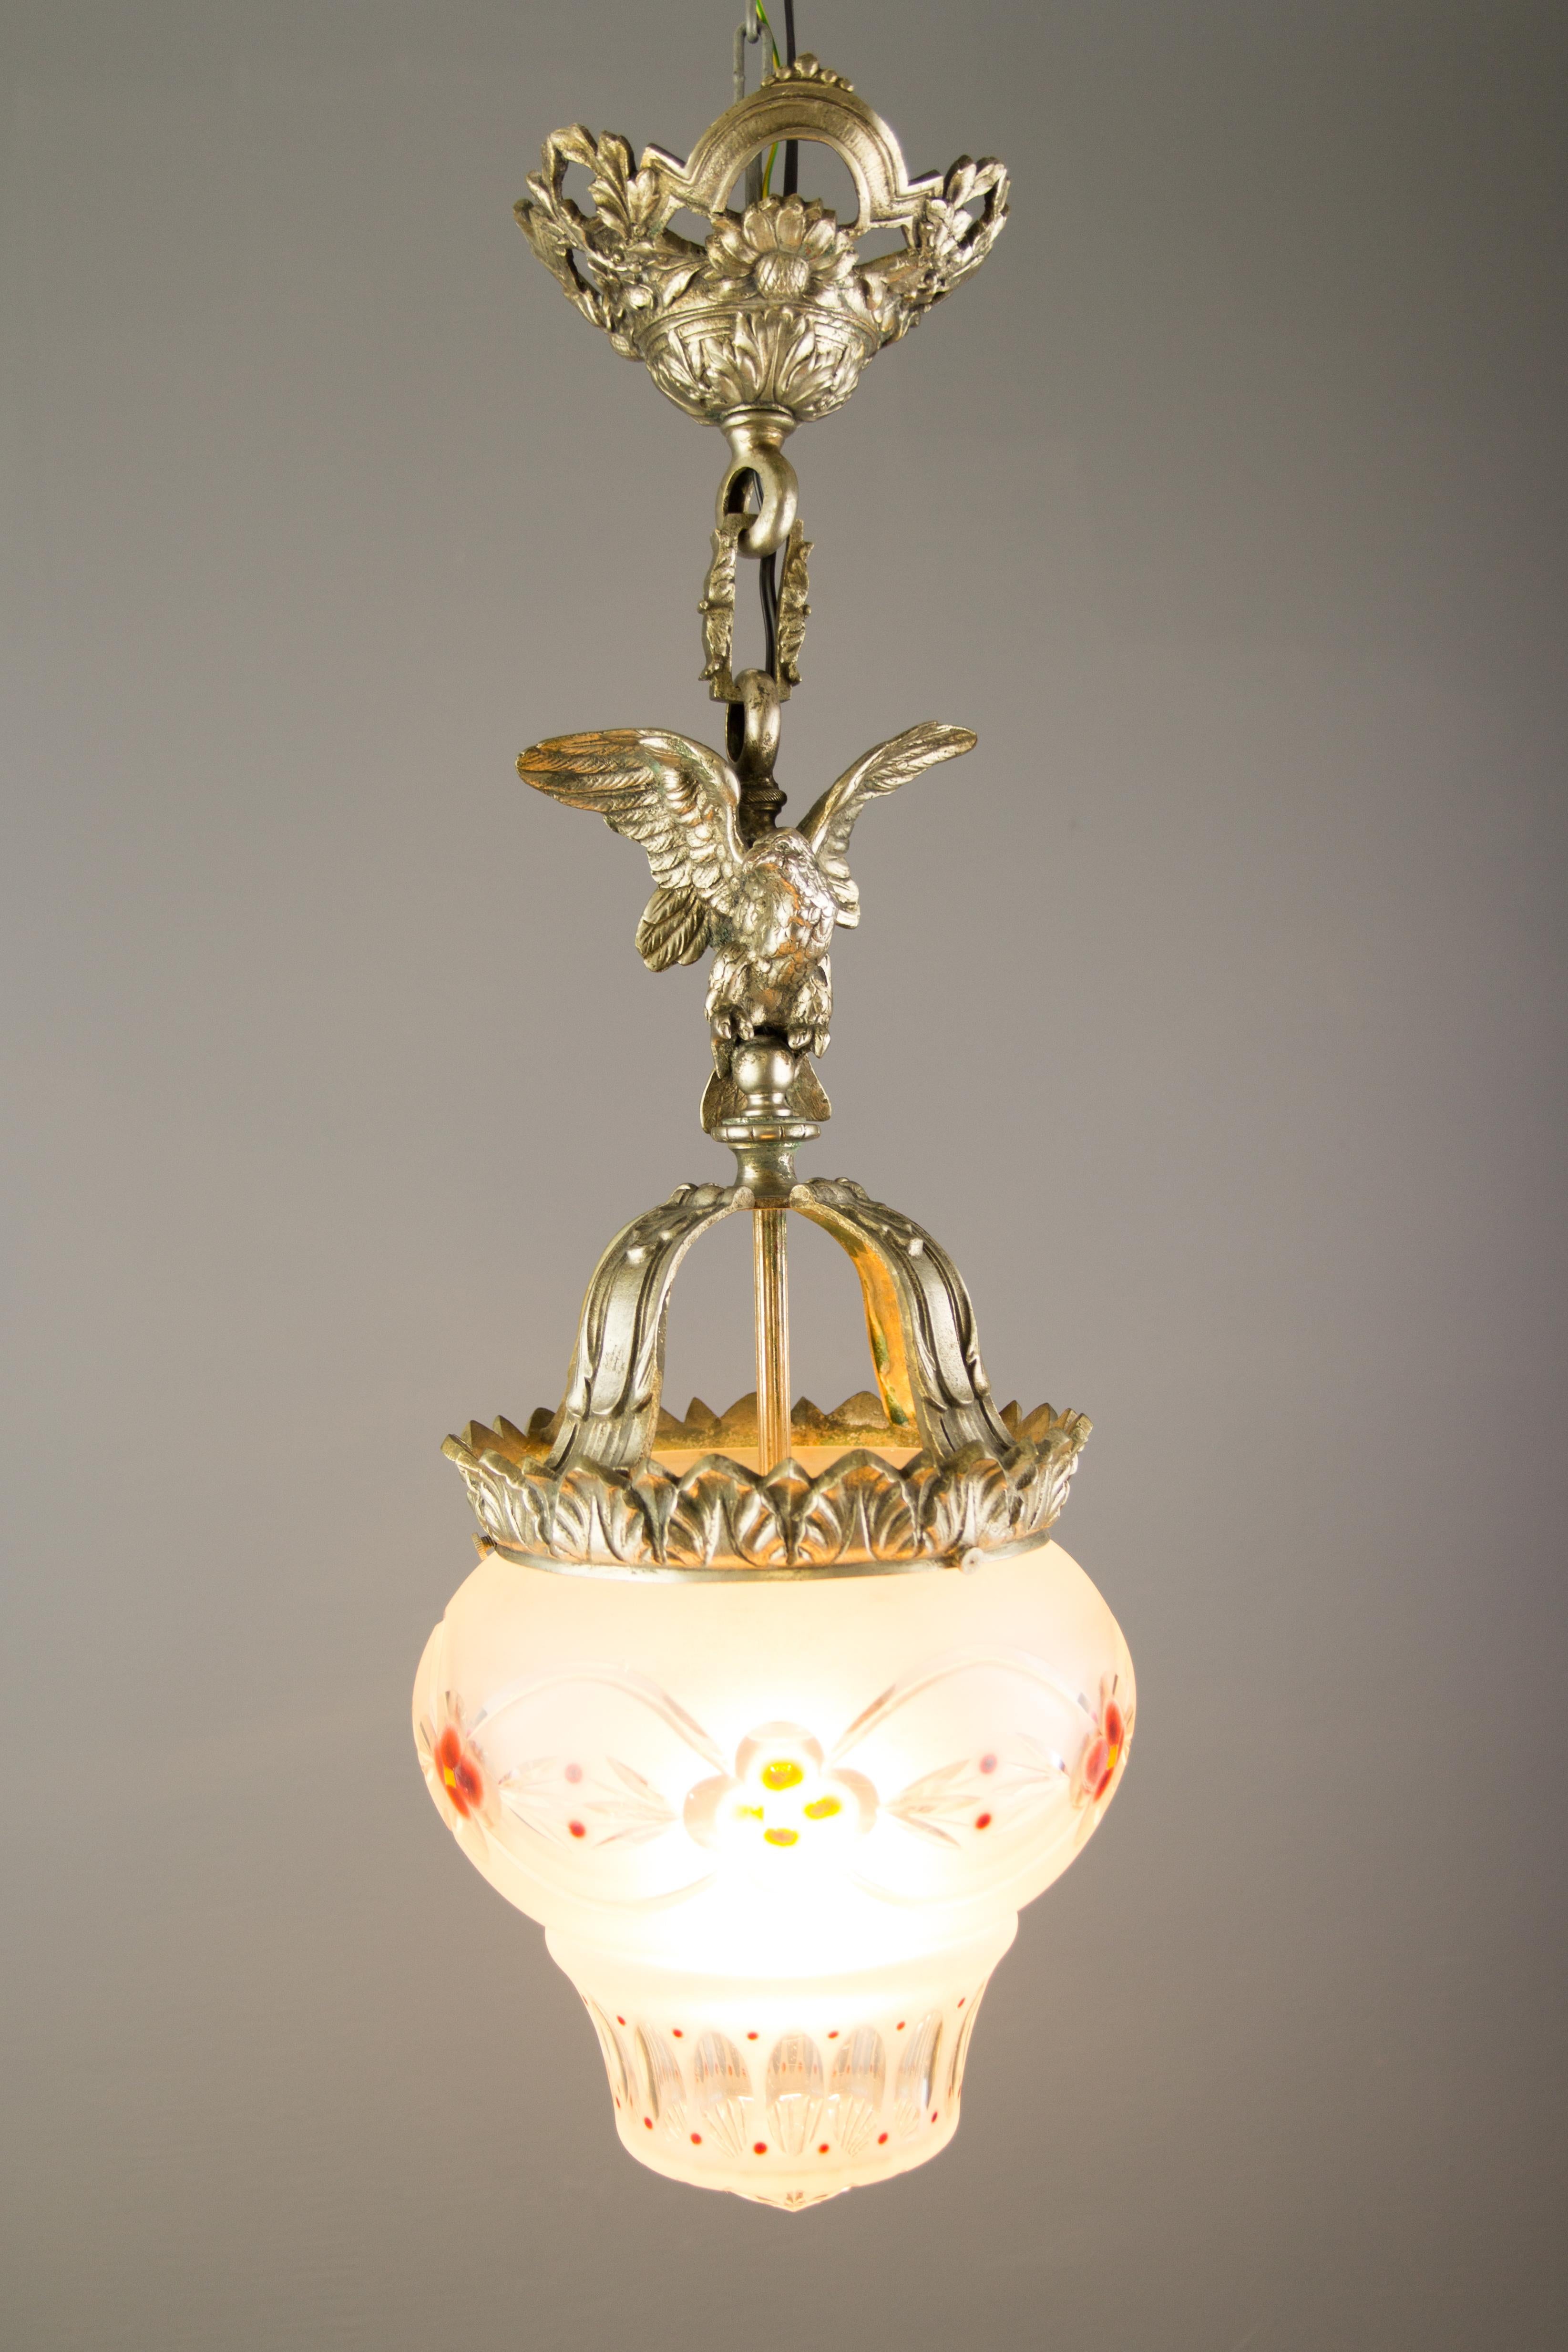 French Neoclassical style bronze and frosted glass pendant light with an eagle from circa the 1920s.
A decorative French pendant light made of bronze with a spread-winged eagle above the bronze crown. Beautifully shaped, engraved frosted glass